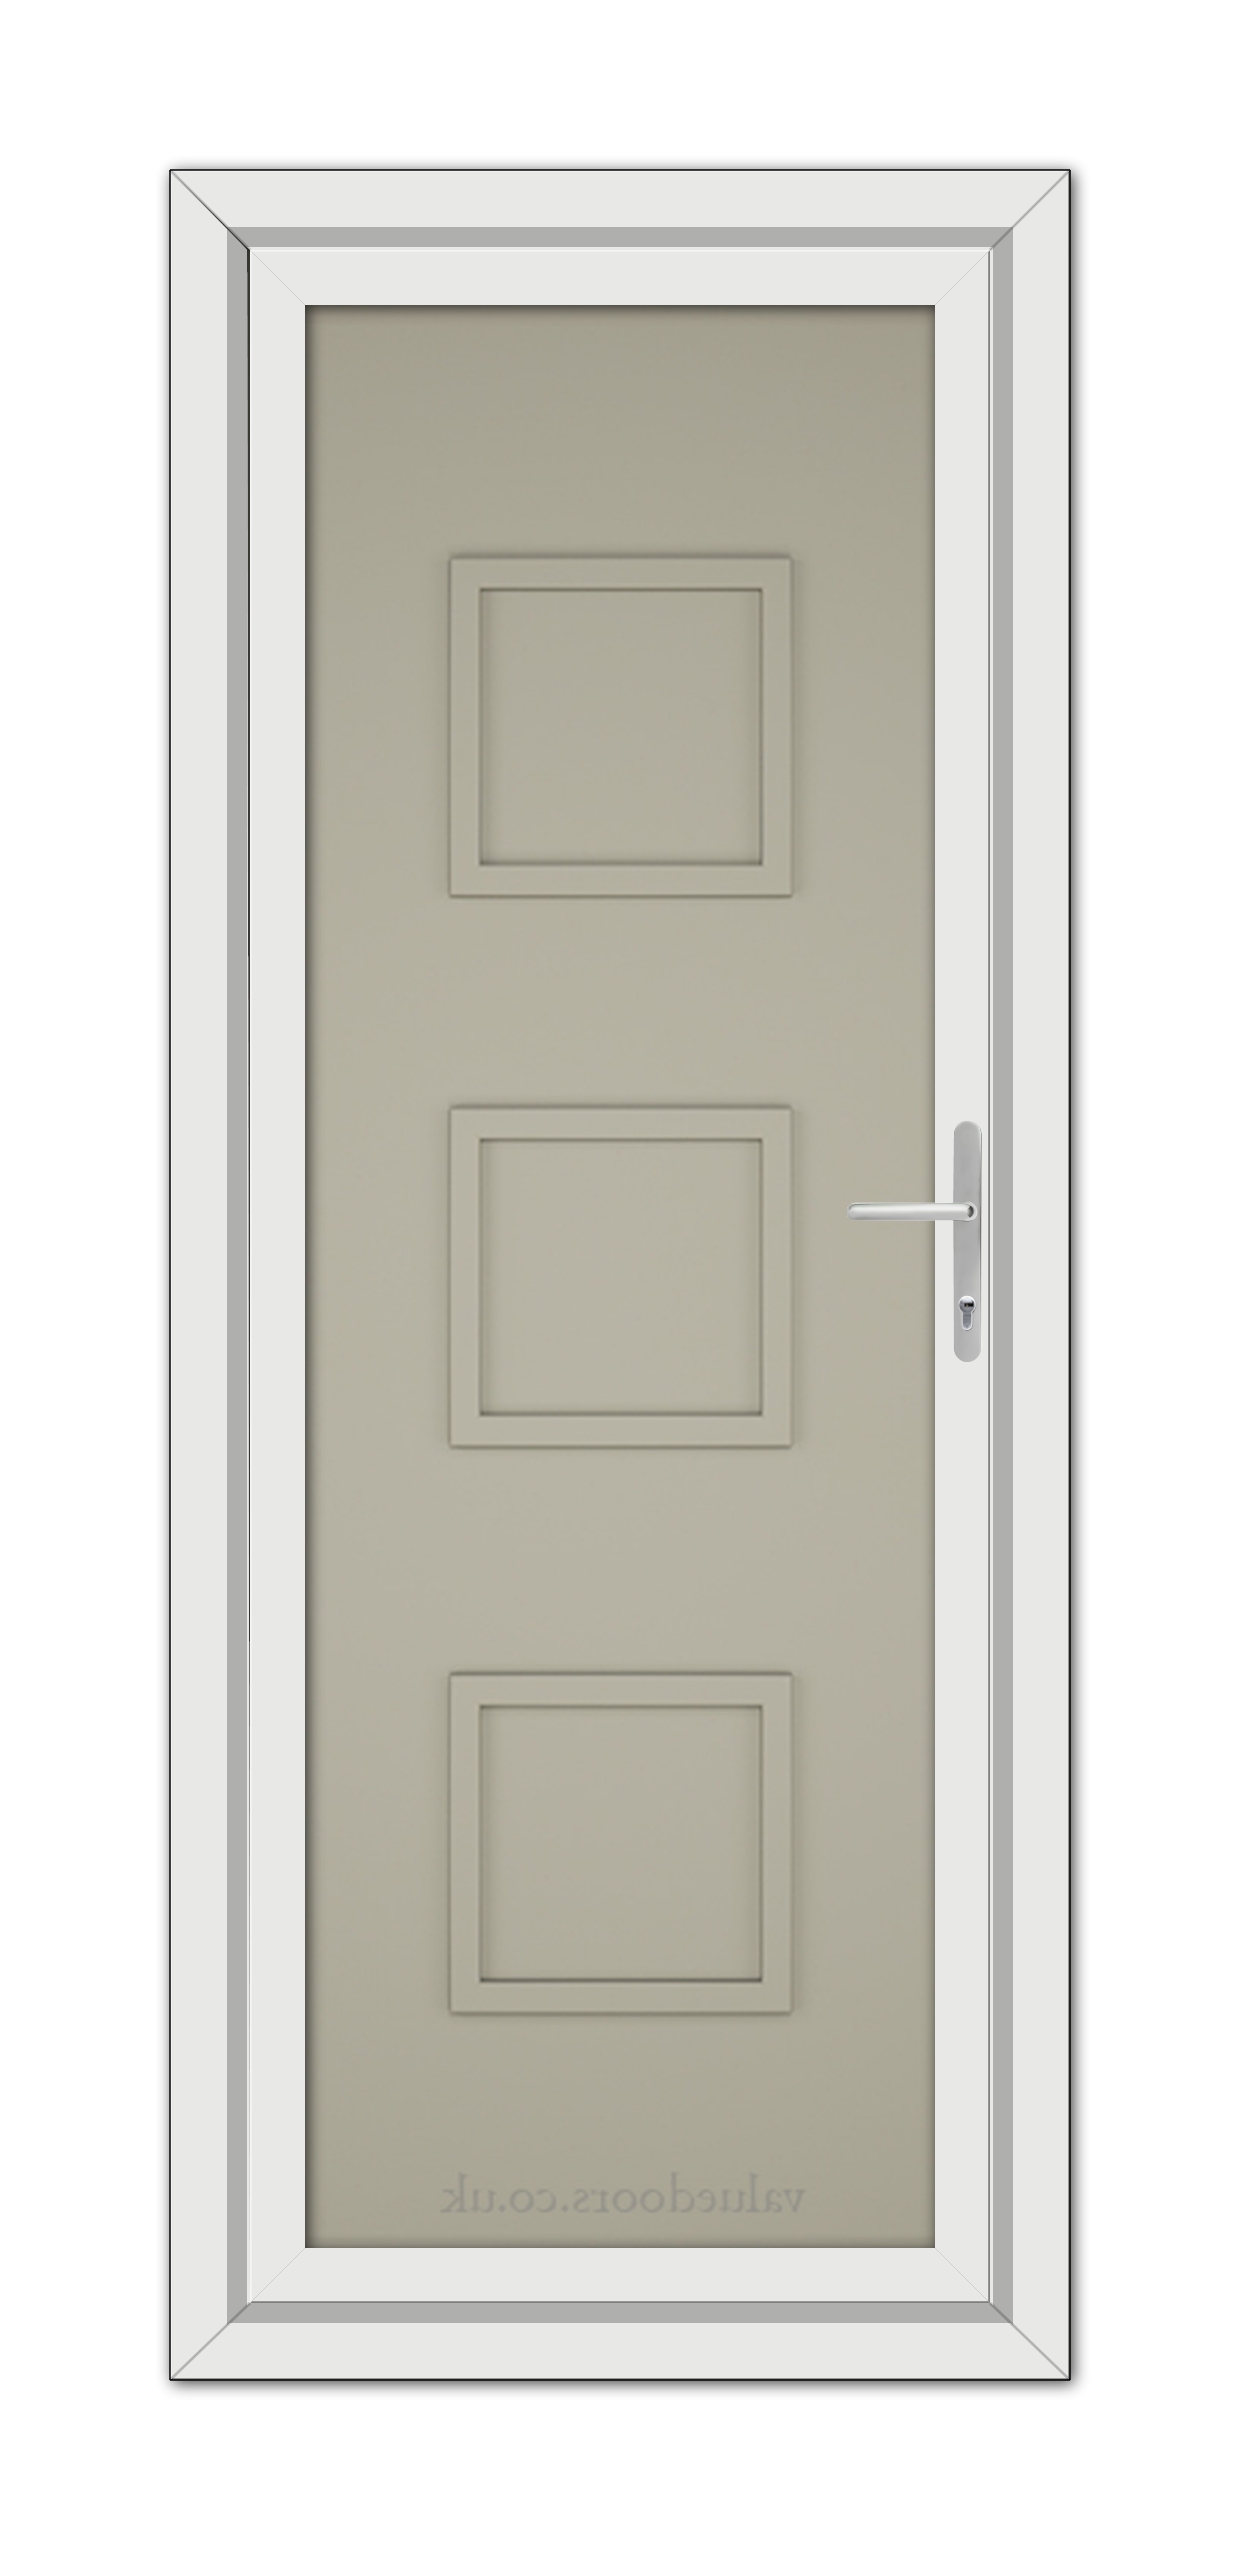 A vertical image of a closed, Pebble Grey Modern 5013 Solid uPVC Door with three recessed panels and a metallic handle, set within a white frame.